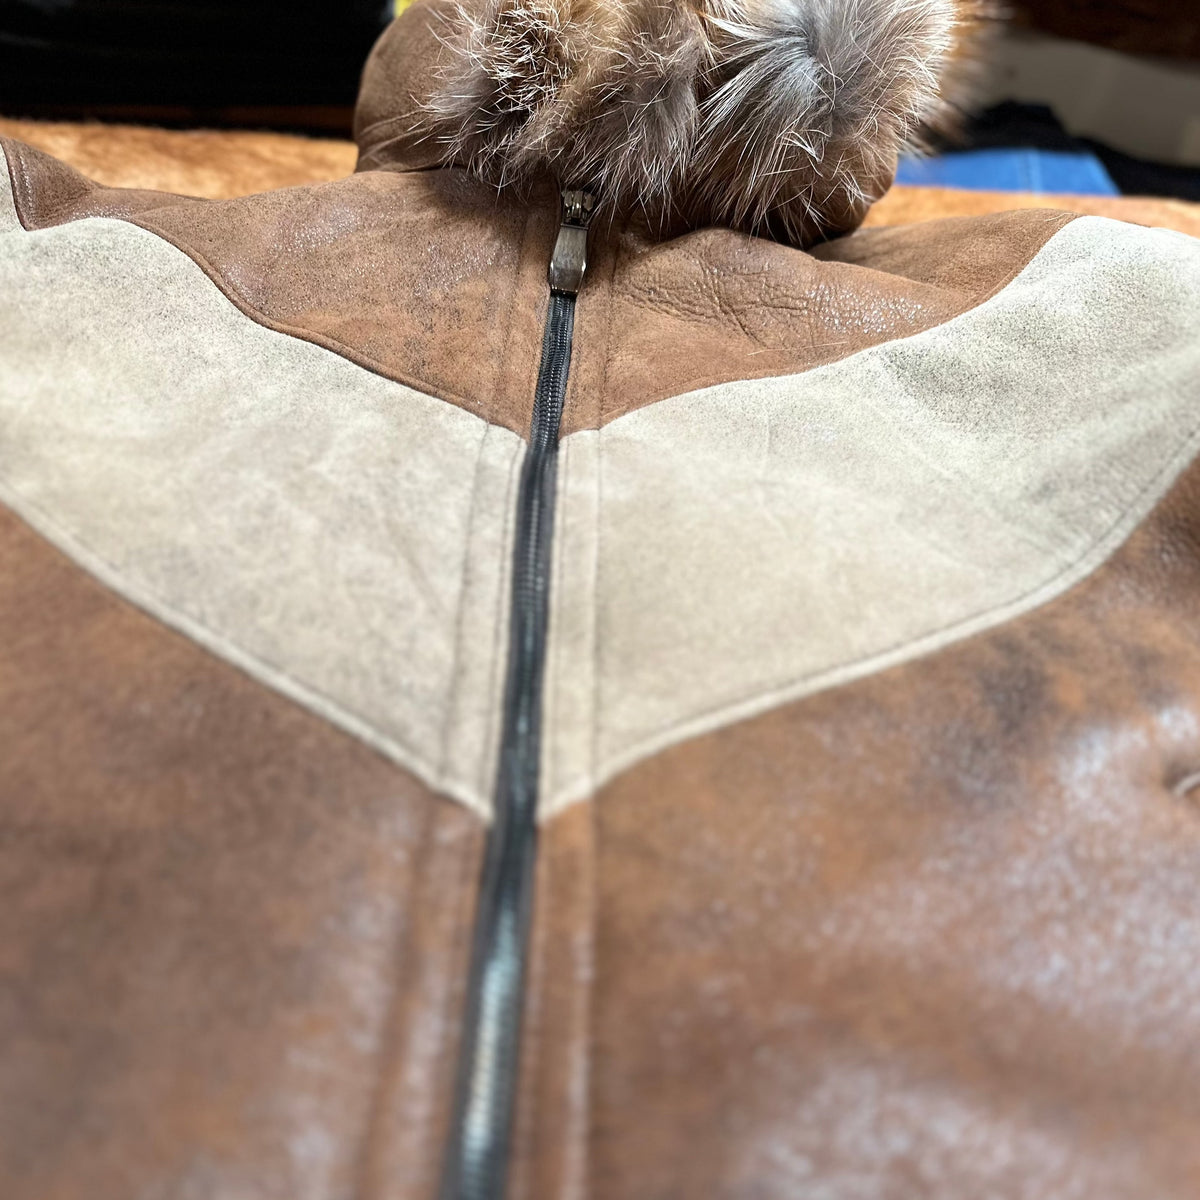 Kashani Two-Tone Brown Fox Hooded Shearling - Dudes Boutique